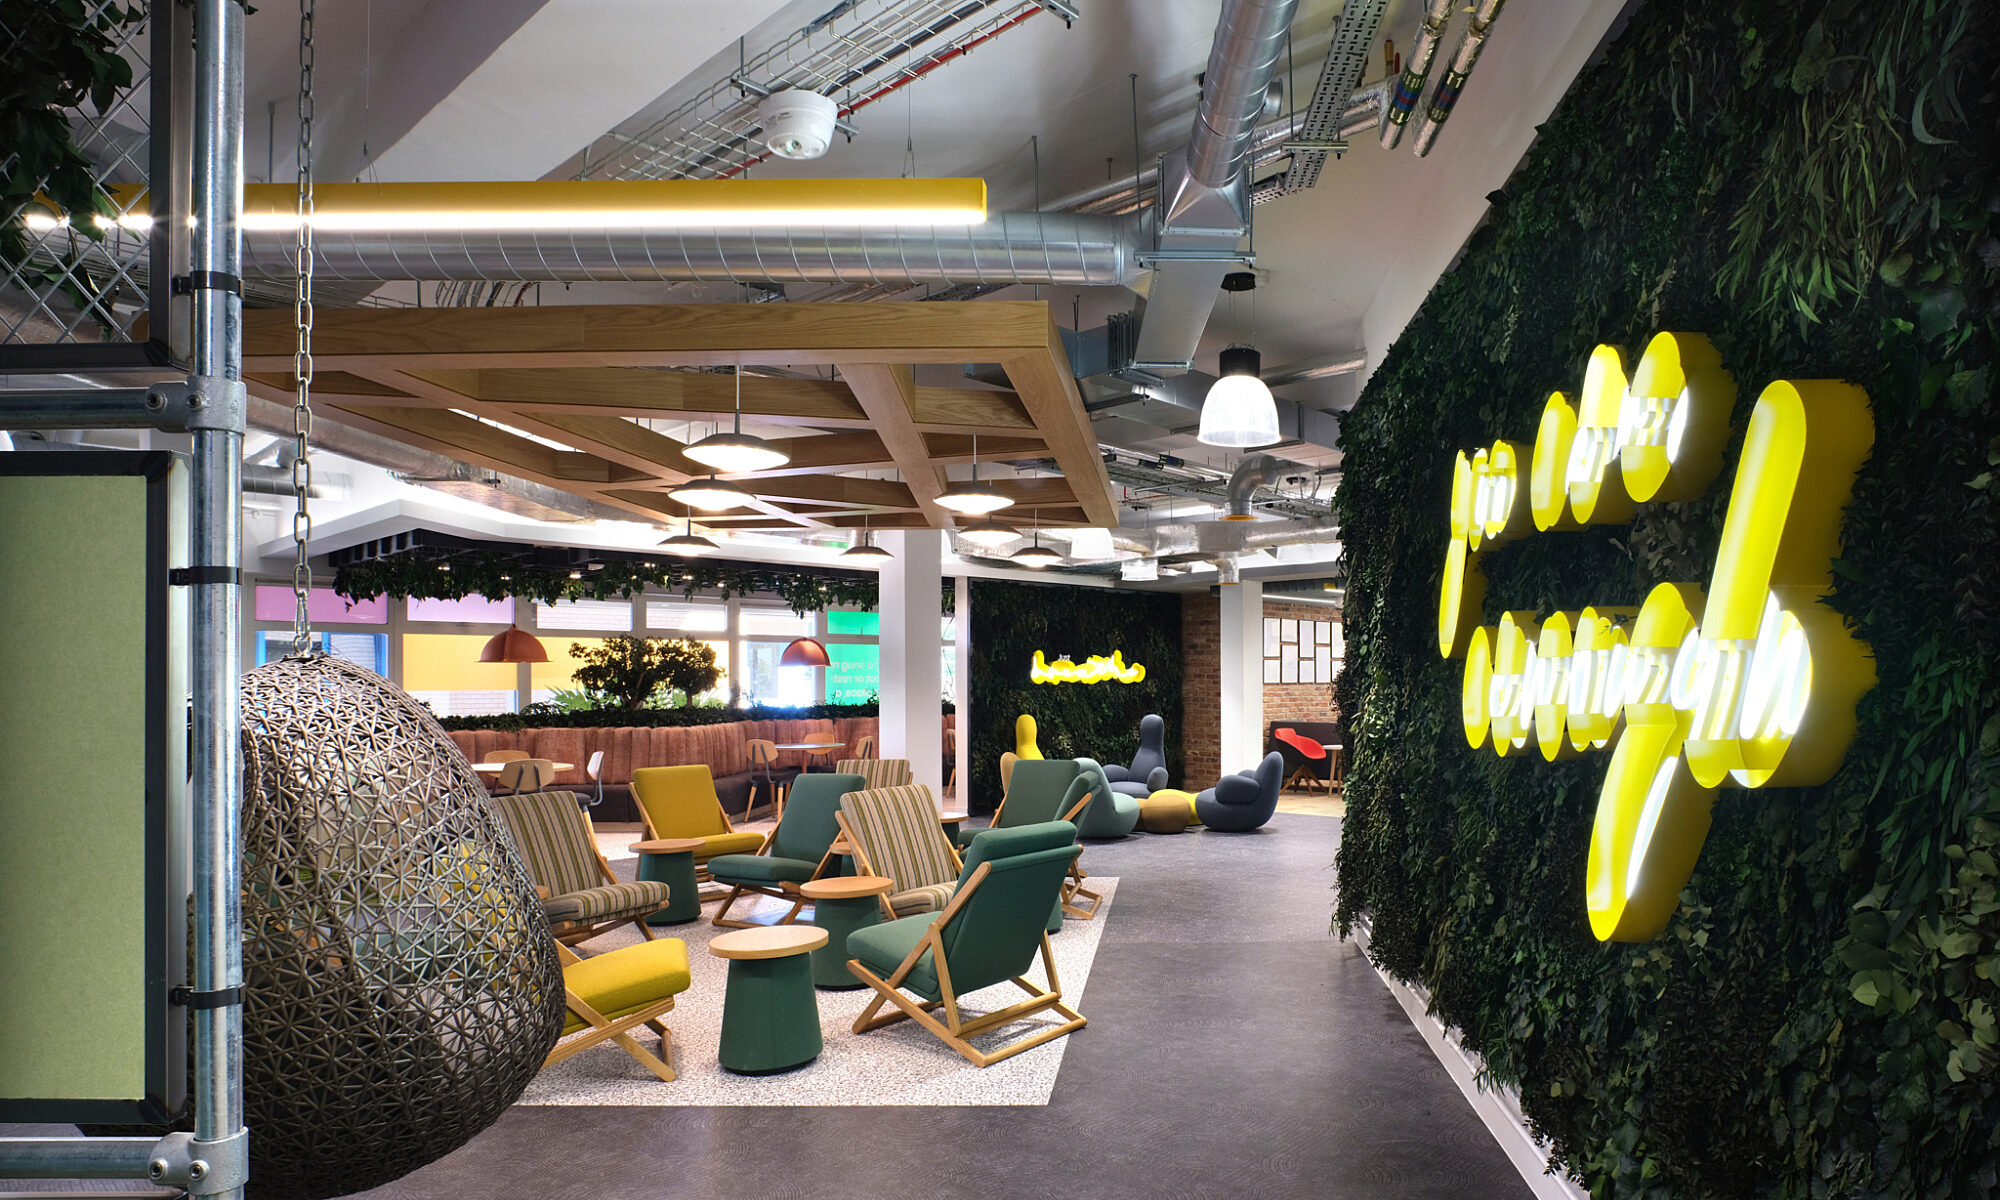 Biophilic wall and unique seating